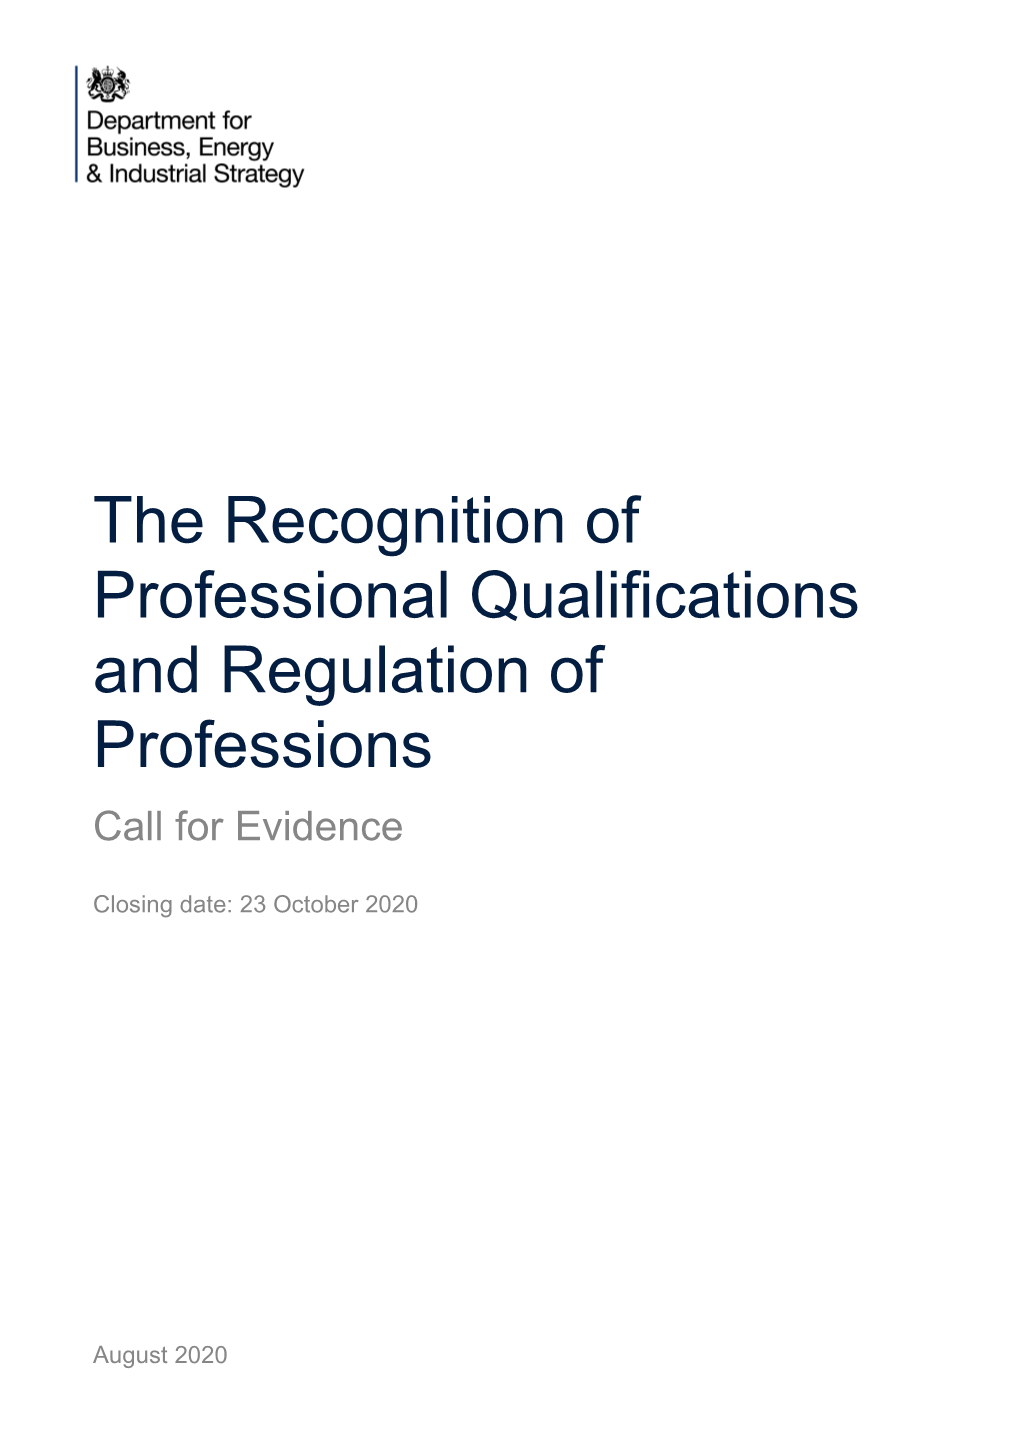 The Recognition of Professional Qualifications and Regulation of Professions: Call for Evidence